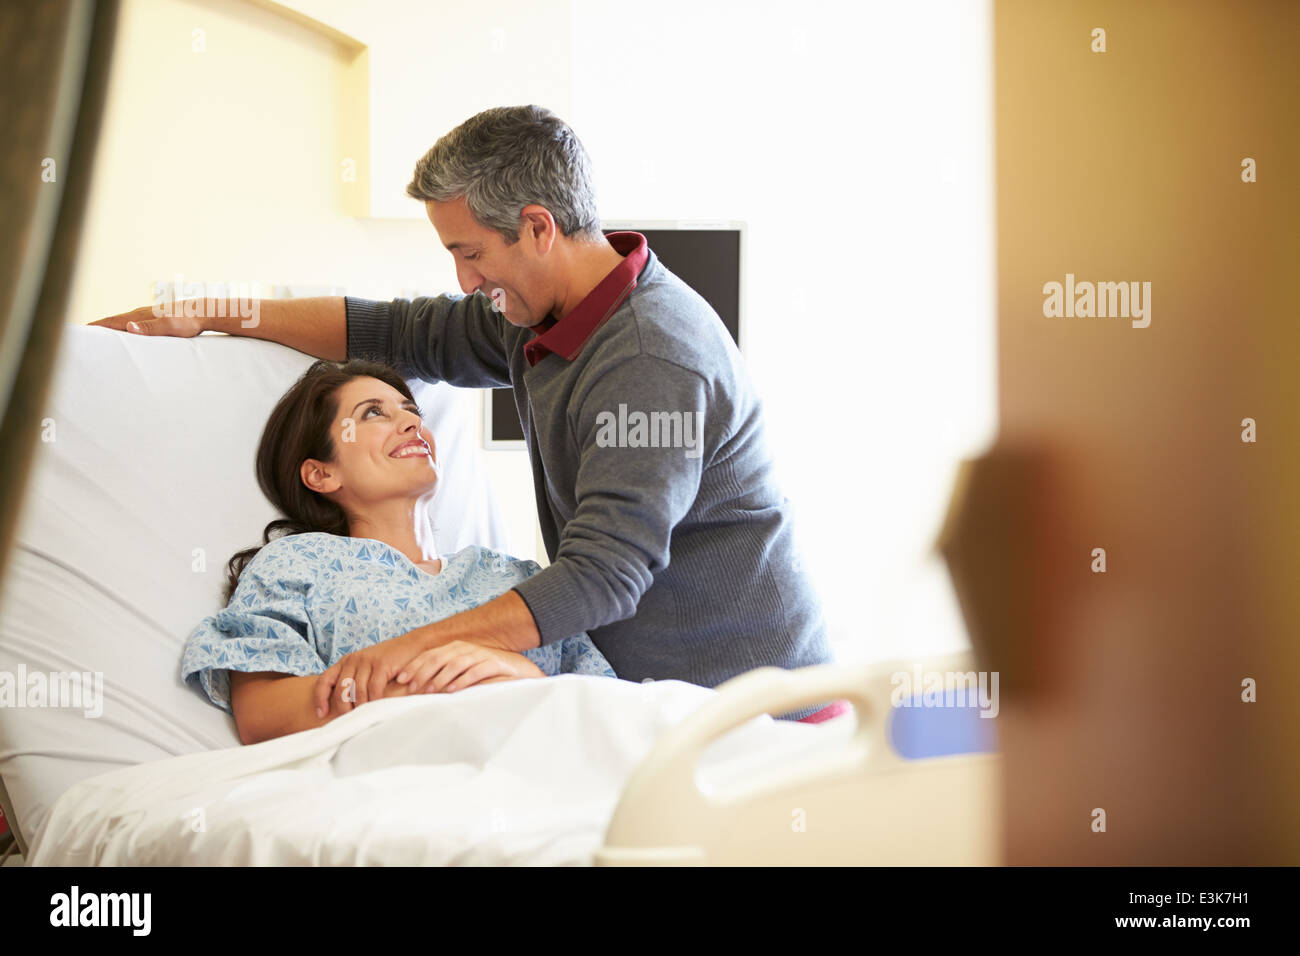 Husband Visiting Wife In Hospital Stock Photo